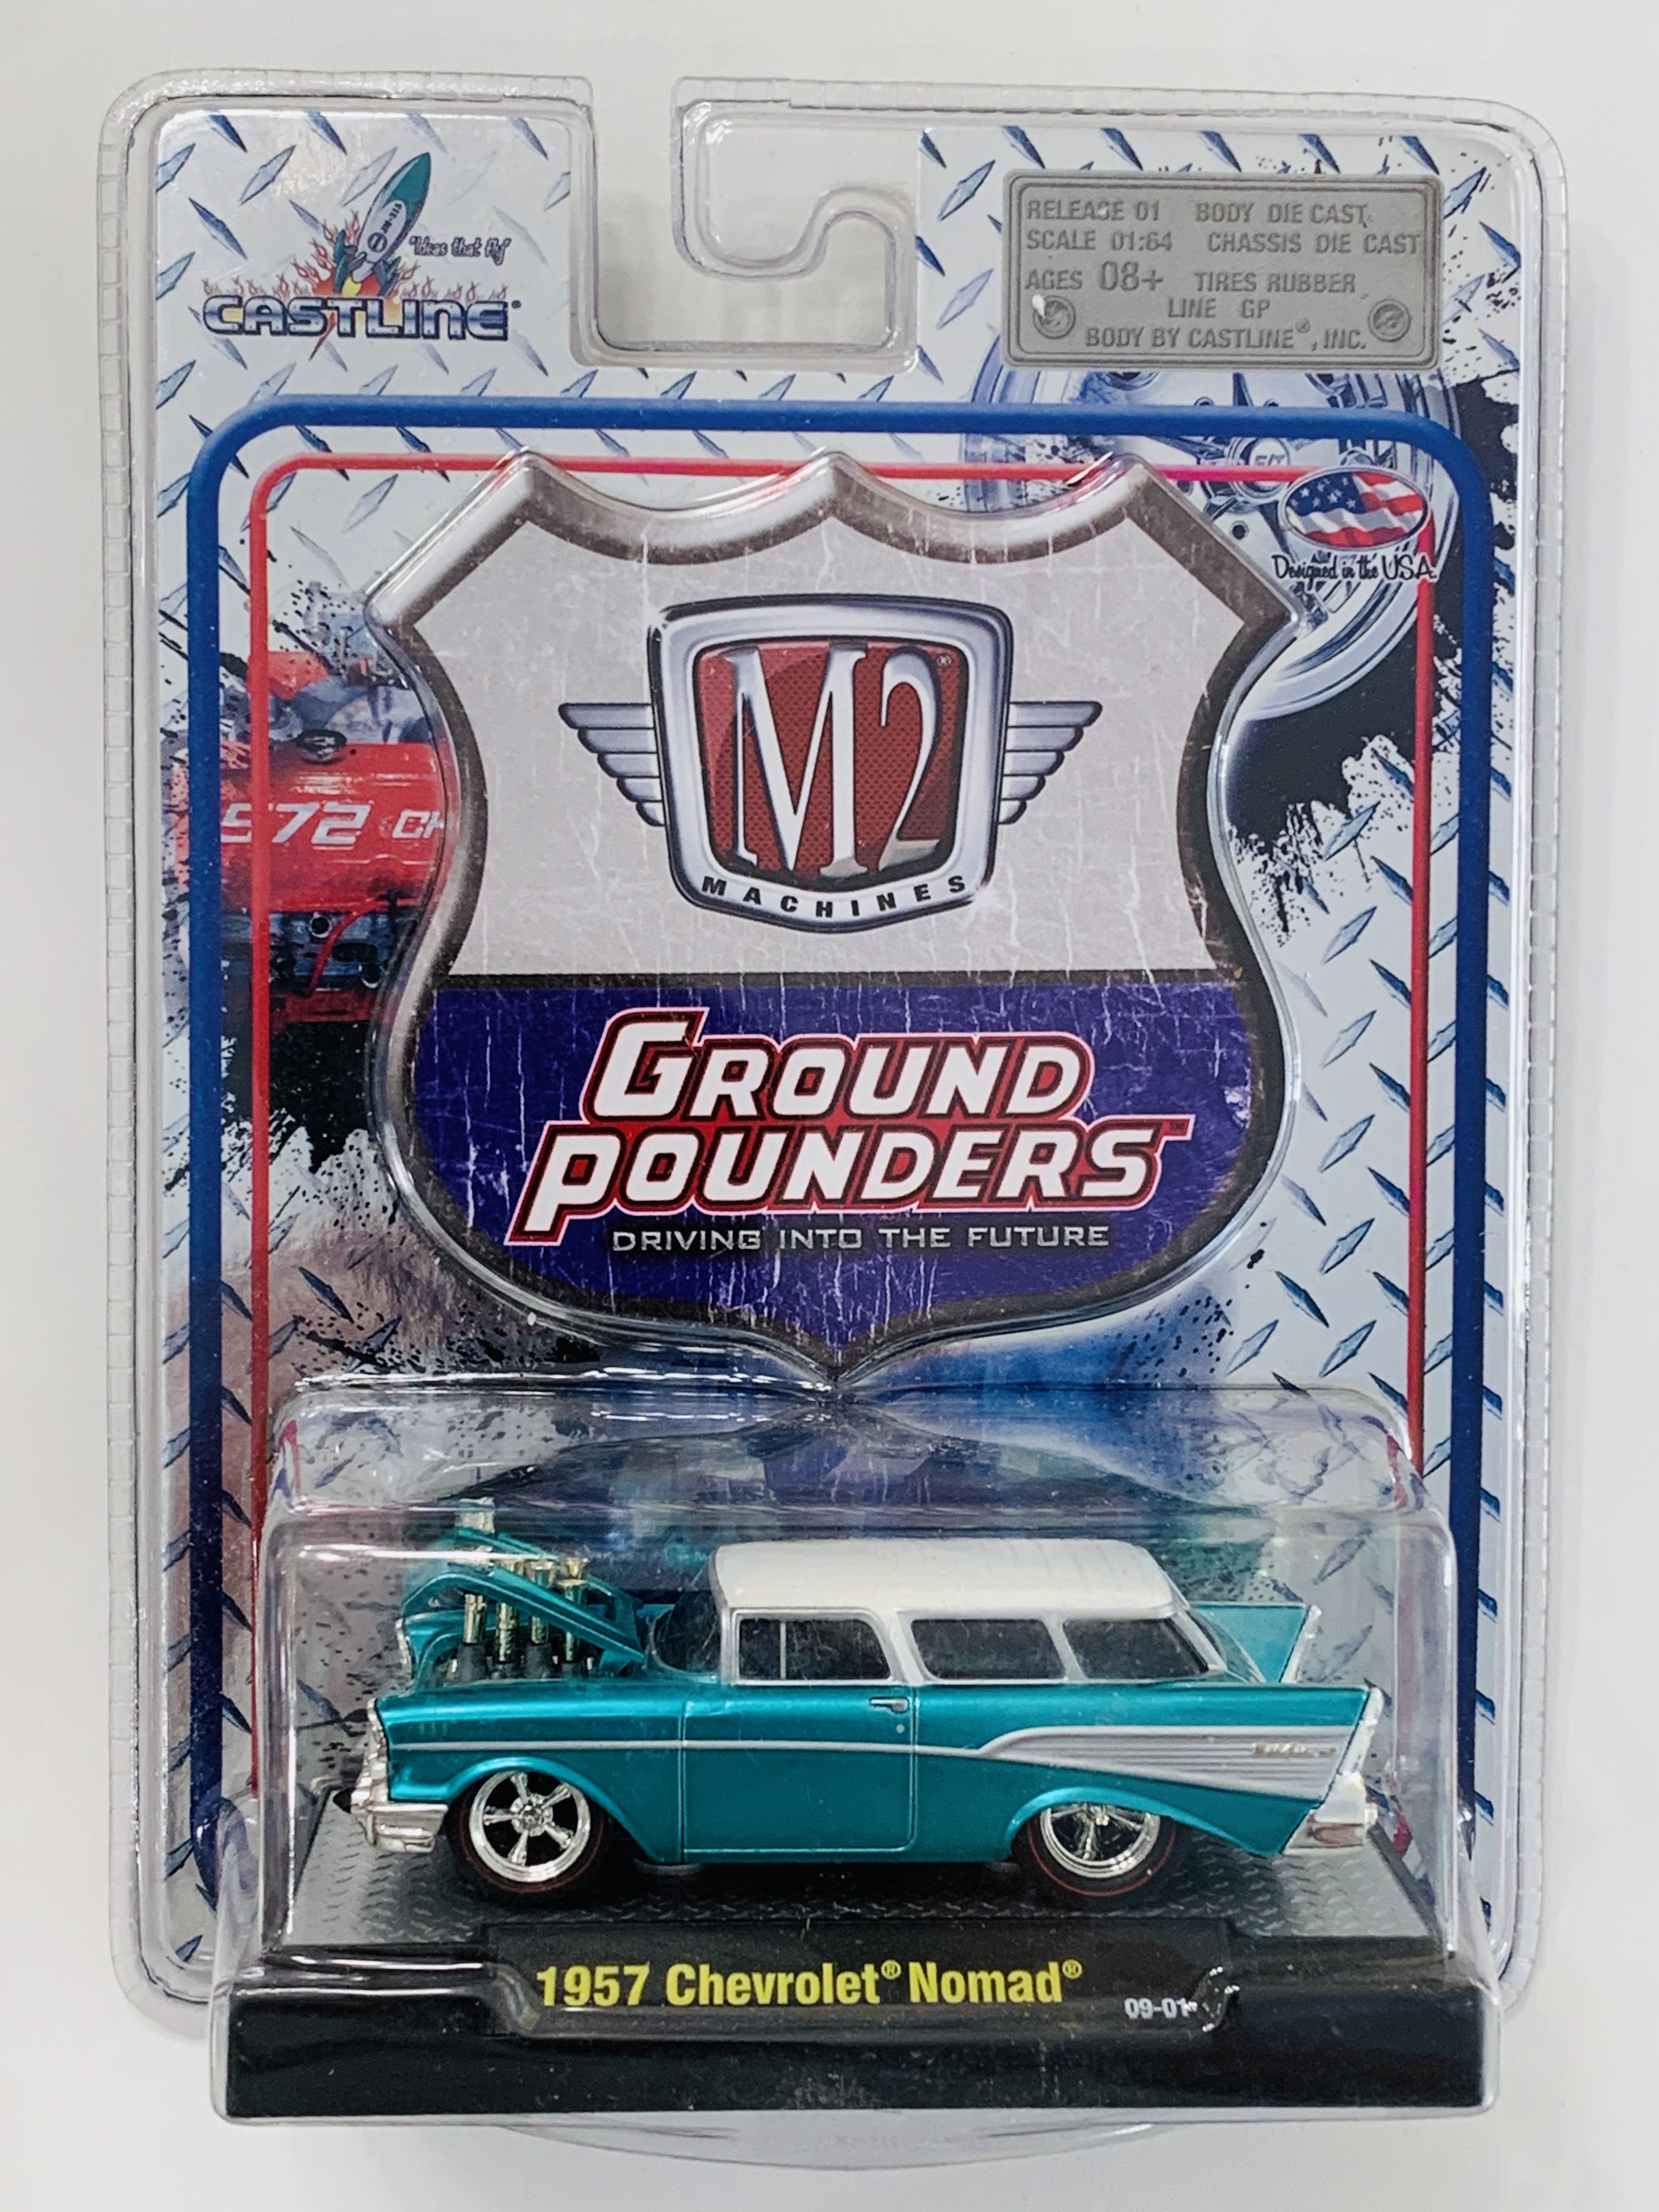 M2 Machines Ground Pounders 1957 Chevrolet Nomad R01